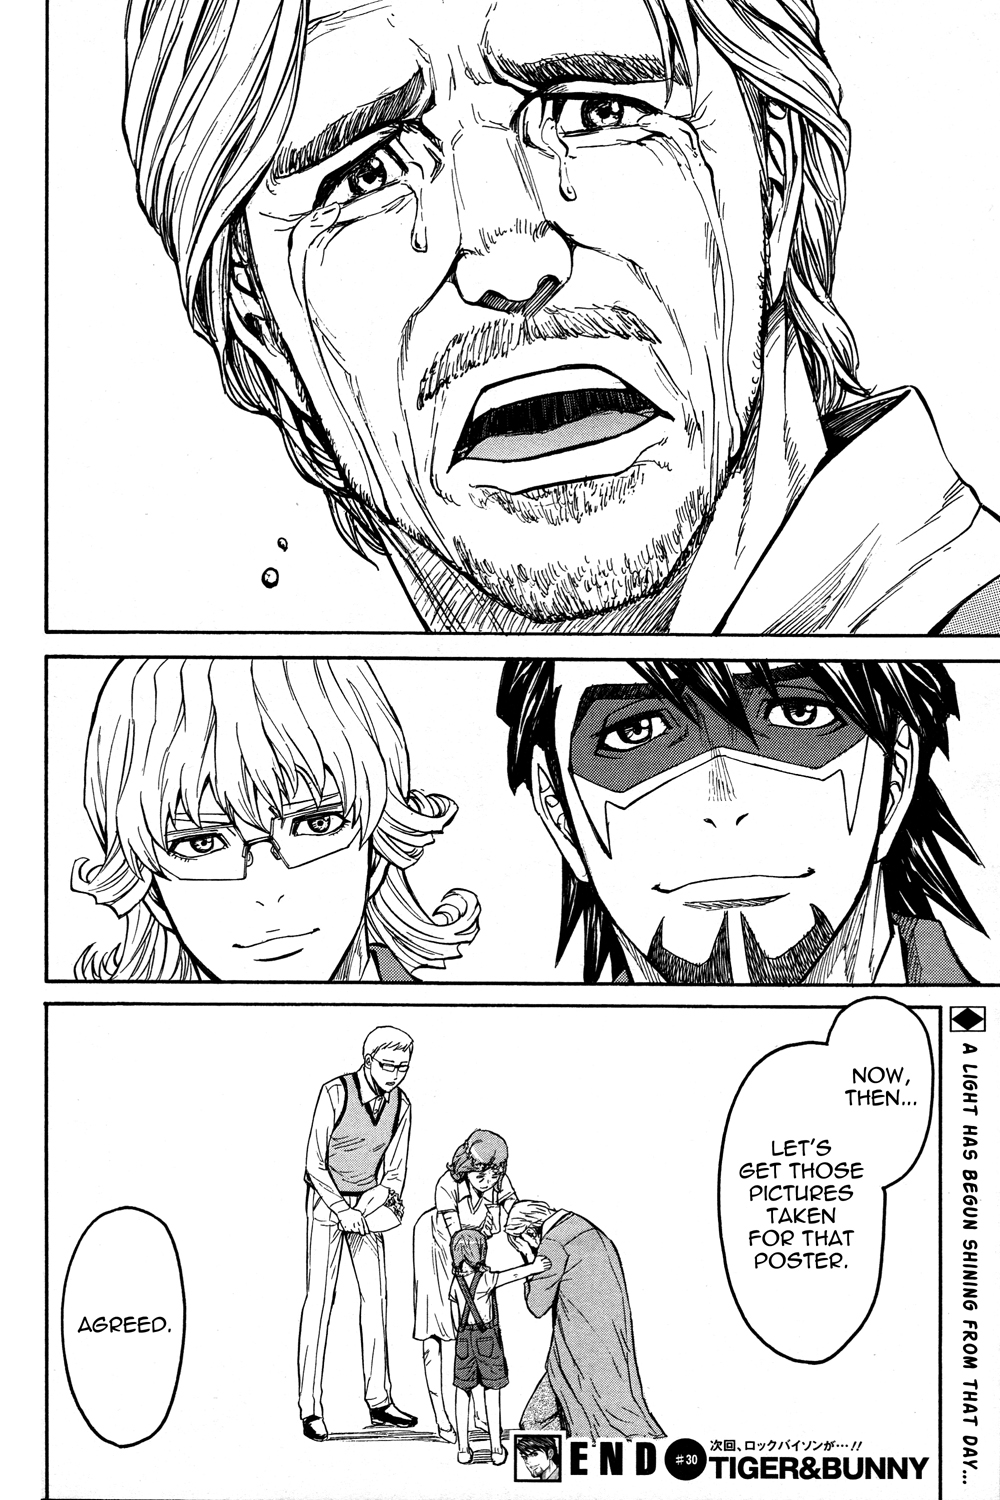 Tiger & Bunny (UEDA Hiroshi) Vol. 6 Ch. 30 Time will take care of the rest...?